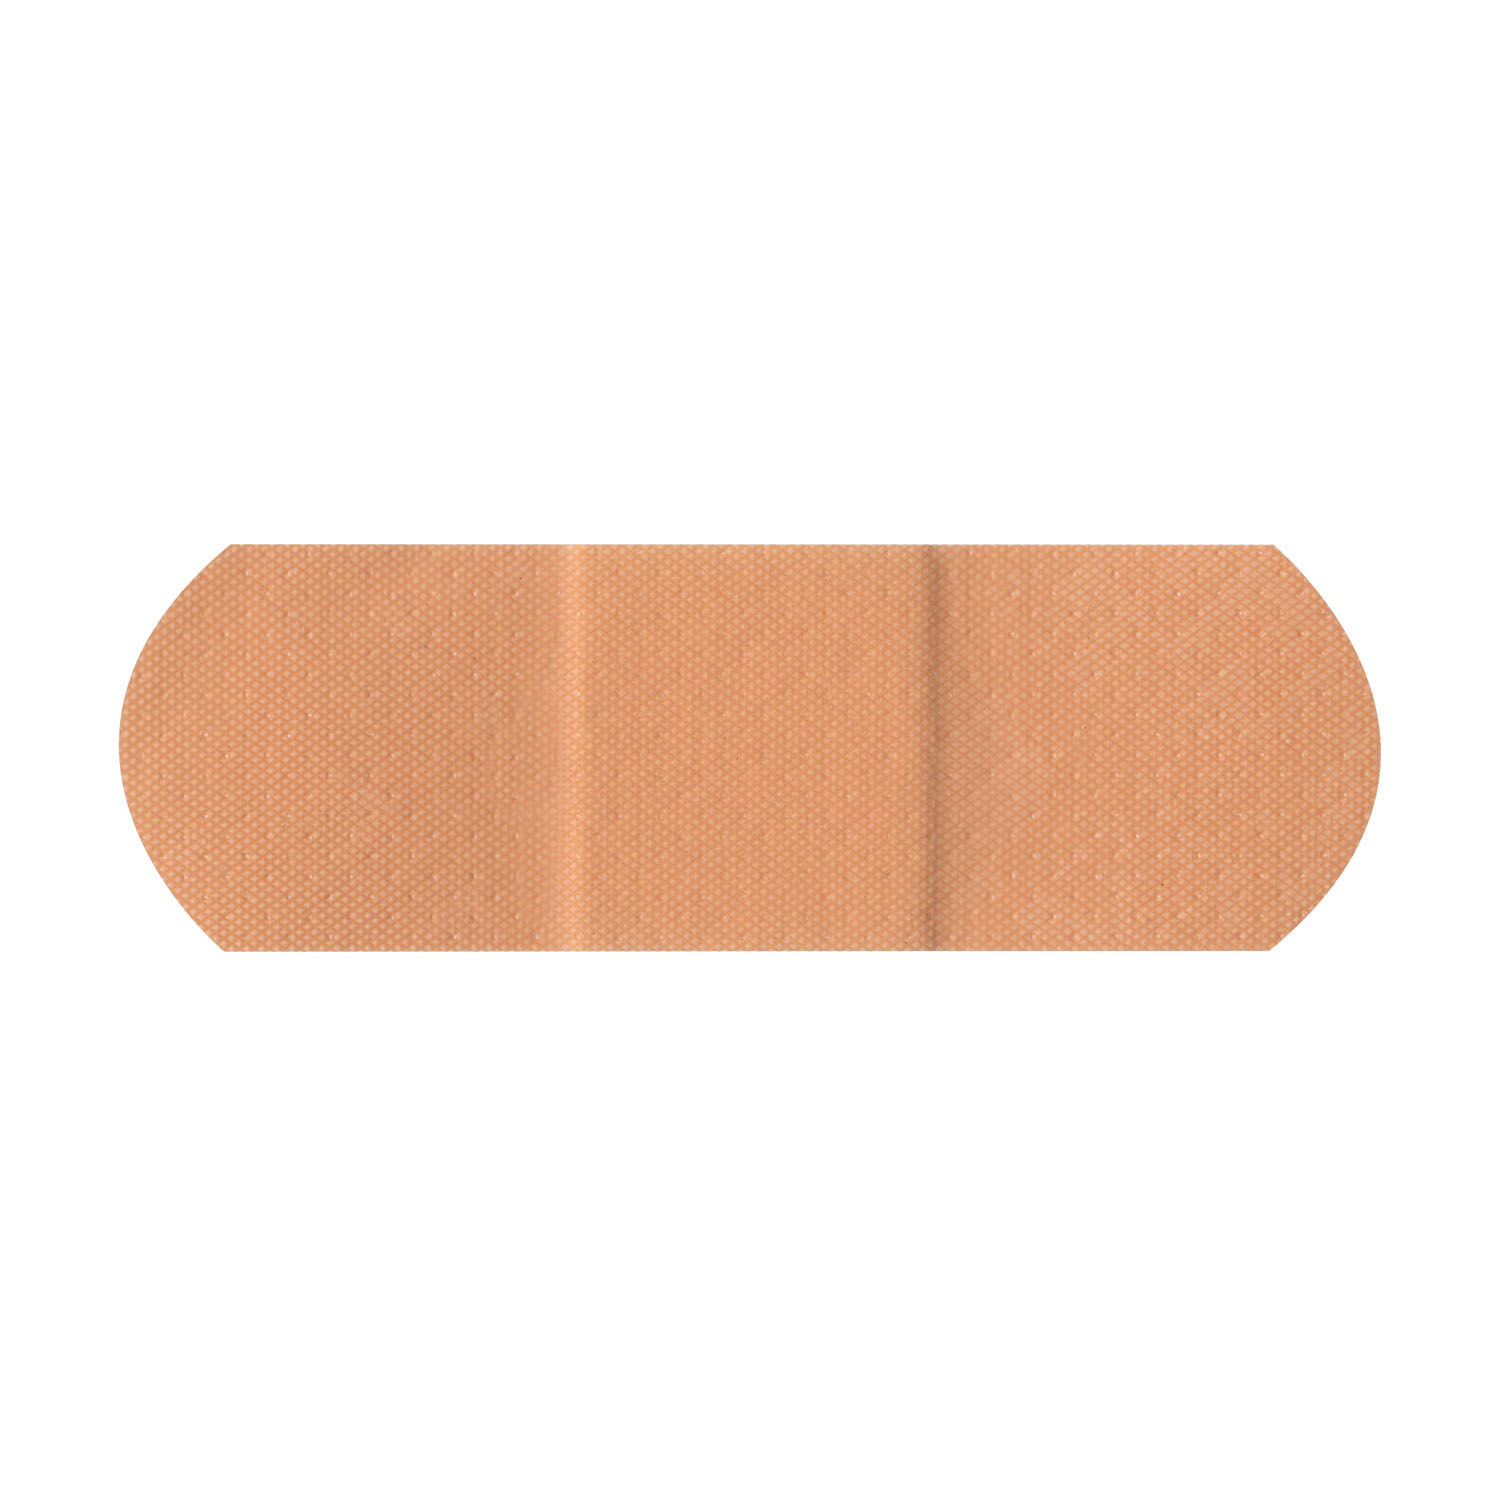 DUKAL FIRST AID SHEER ADHESIVE BANDAGES : 1290033 BX $3.38 Stocked